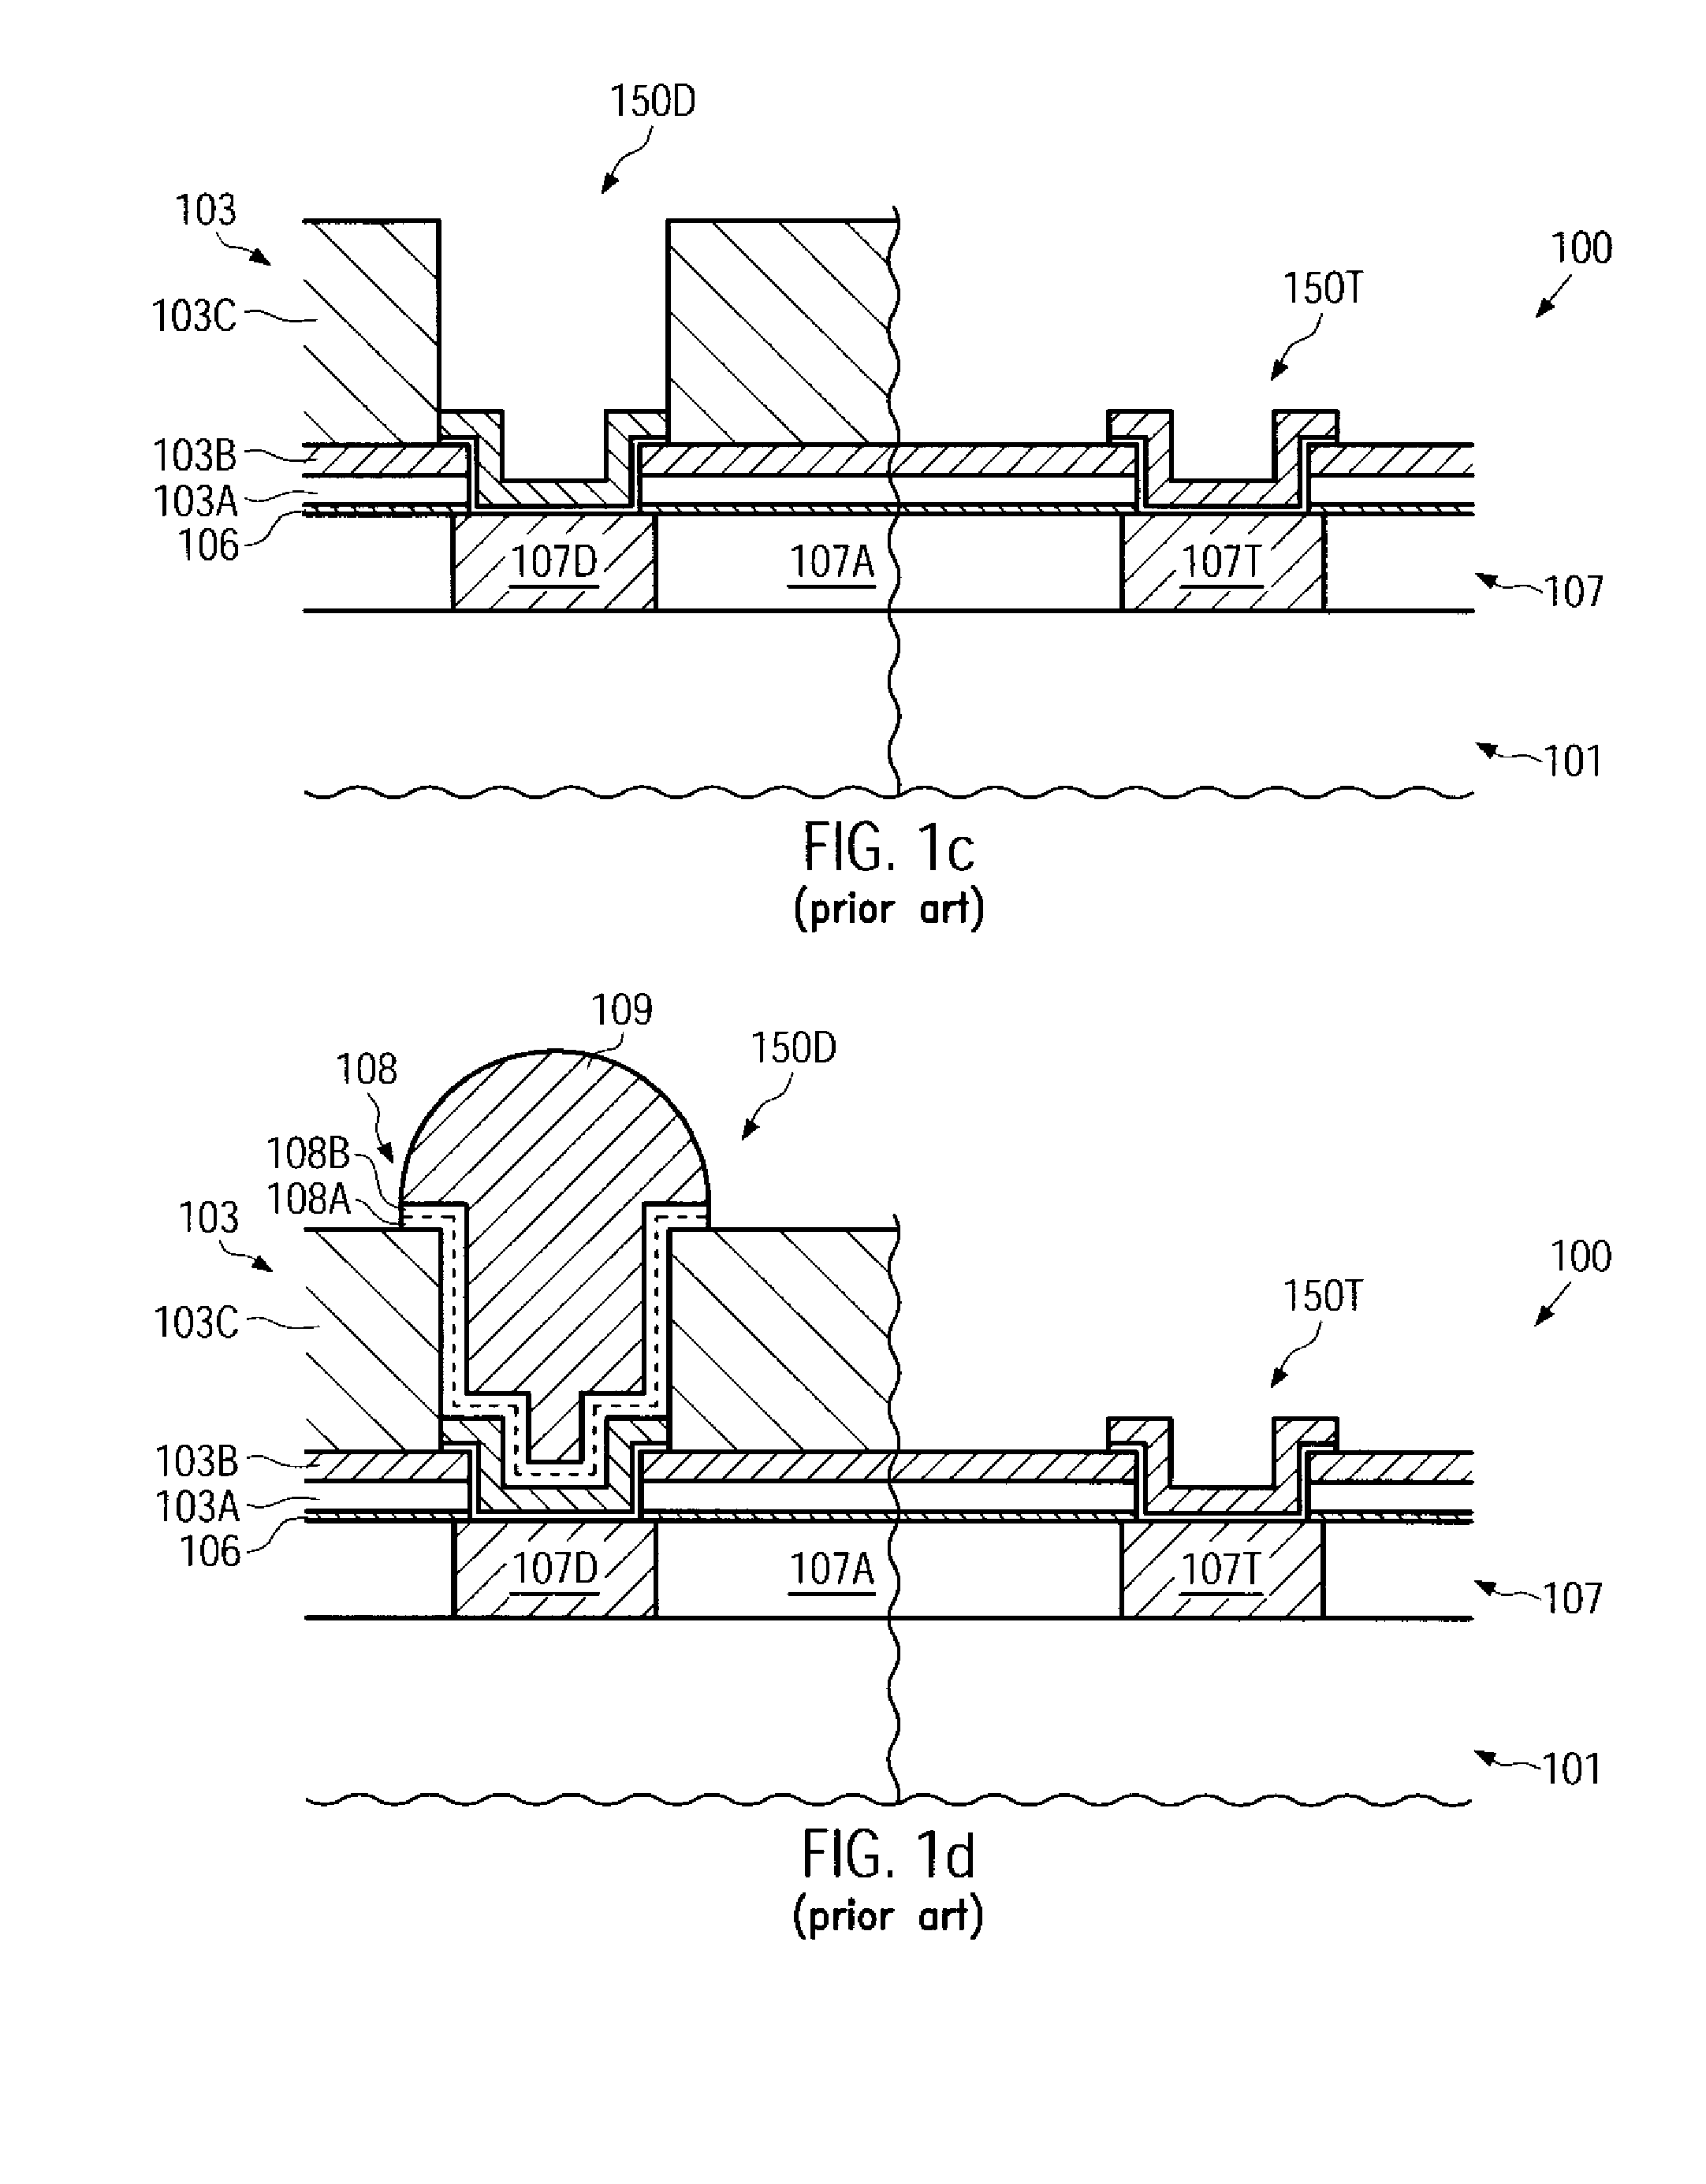 Semiconductor device including a die region designed for aluminum-free solder bump connection and a test structure designed for aluminum-free wire bonding